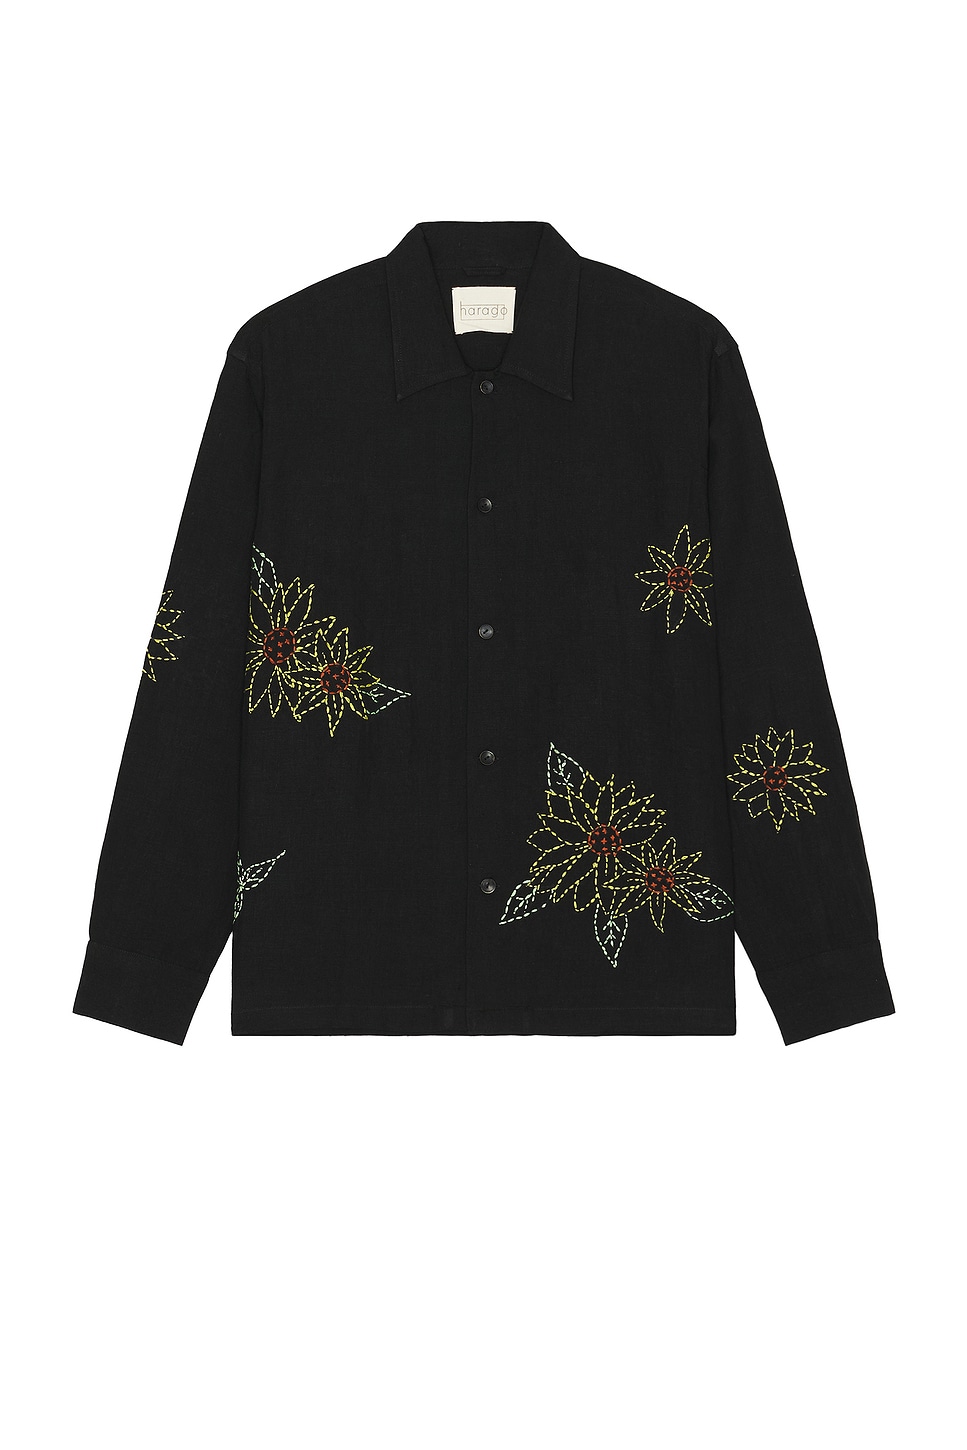 Image 1 of HARAGO Sunflower Embroidered Shirt in Black